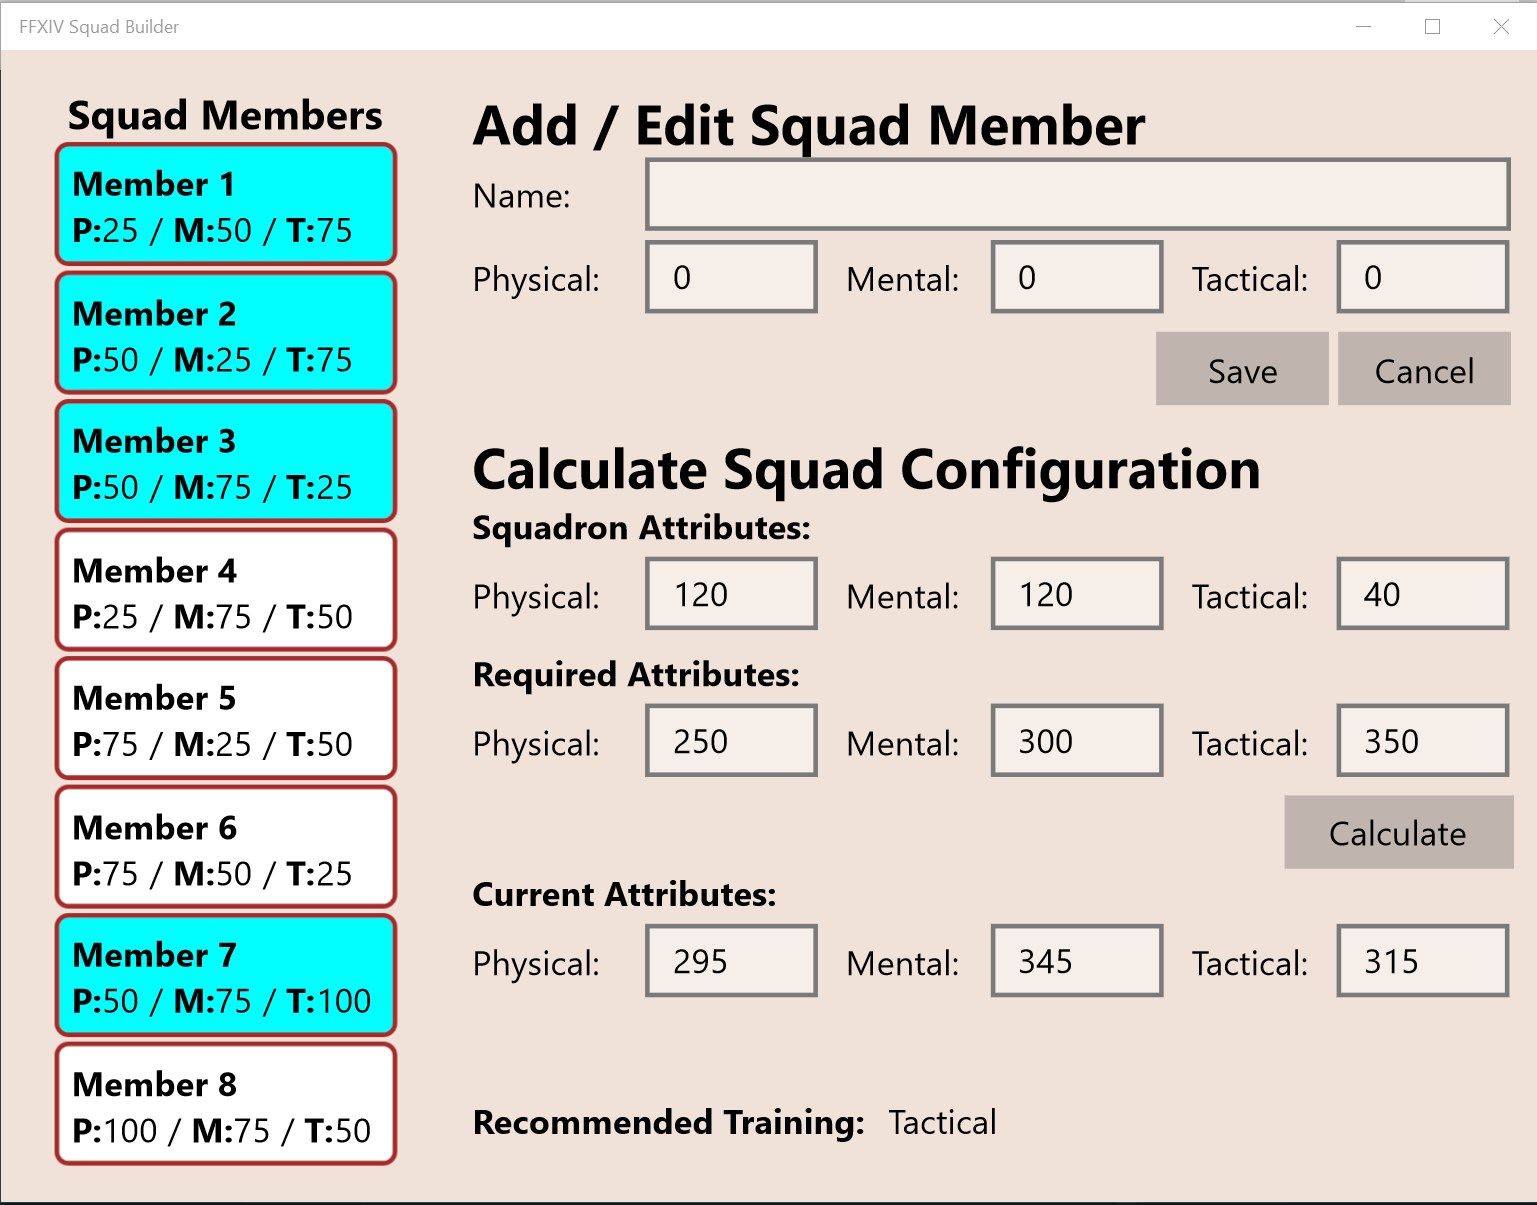 Recommended Squad Deployment and Training